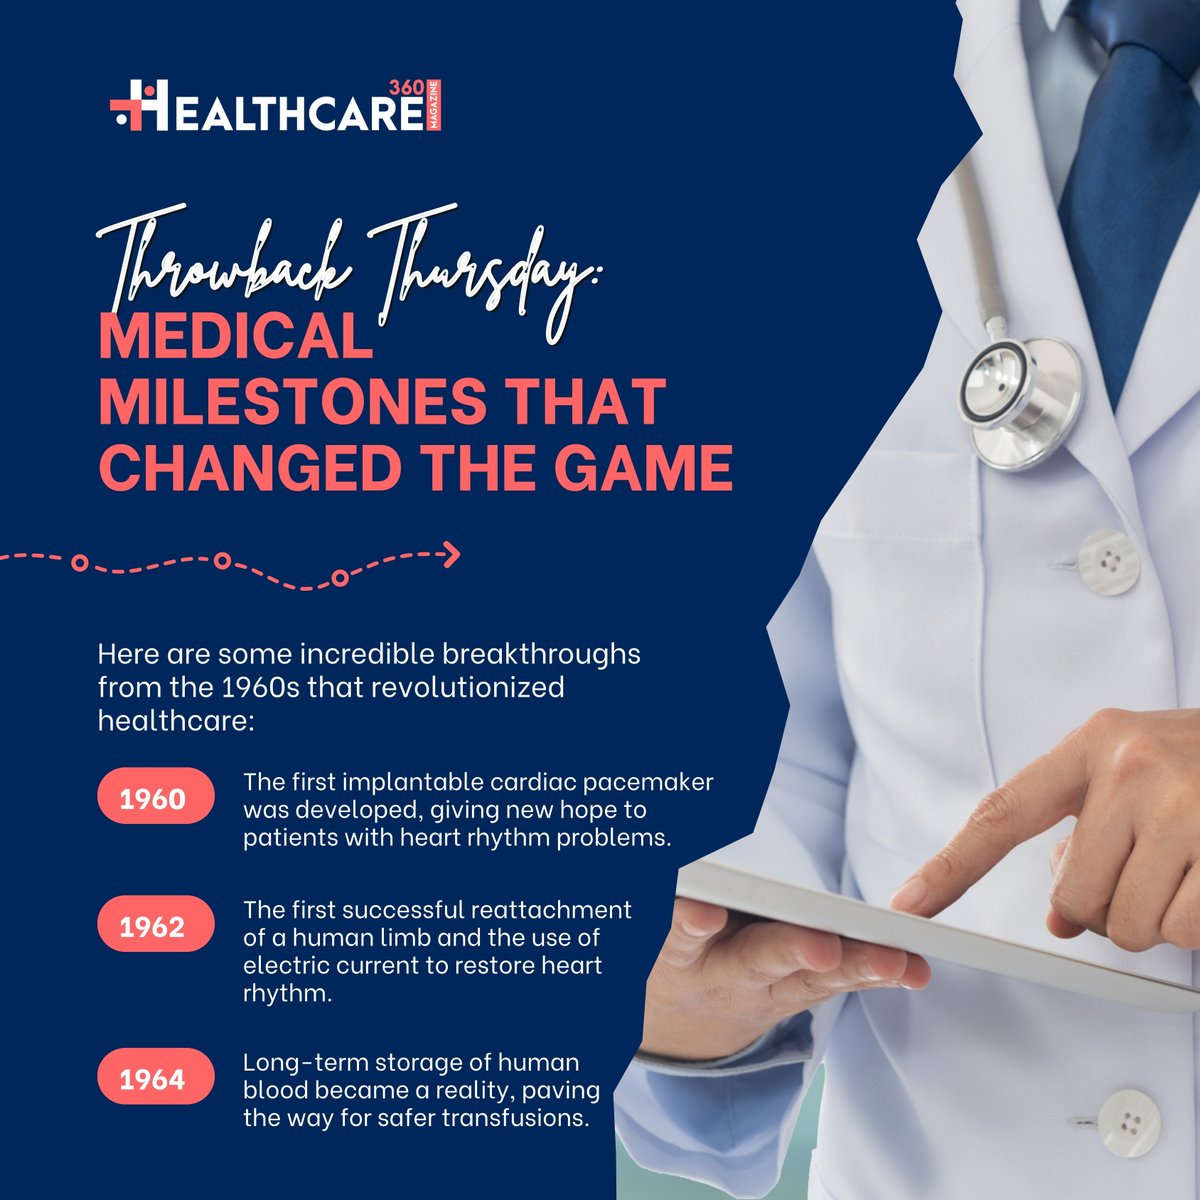 These advancements are just a glimpse into the incredible progress of modern medicine.  What other medical milestones amaze you? Share your thoughts in the comments.

#MedicalMilestones #ThrowbackThursday #HealthcareRevolution #1960sInnovation #CardiacPacemaker #LimbReattachment